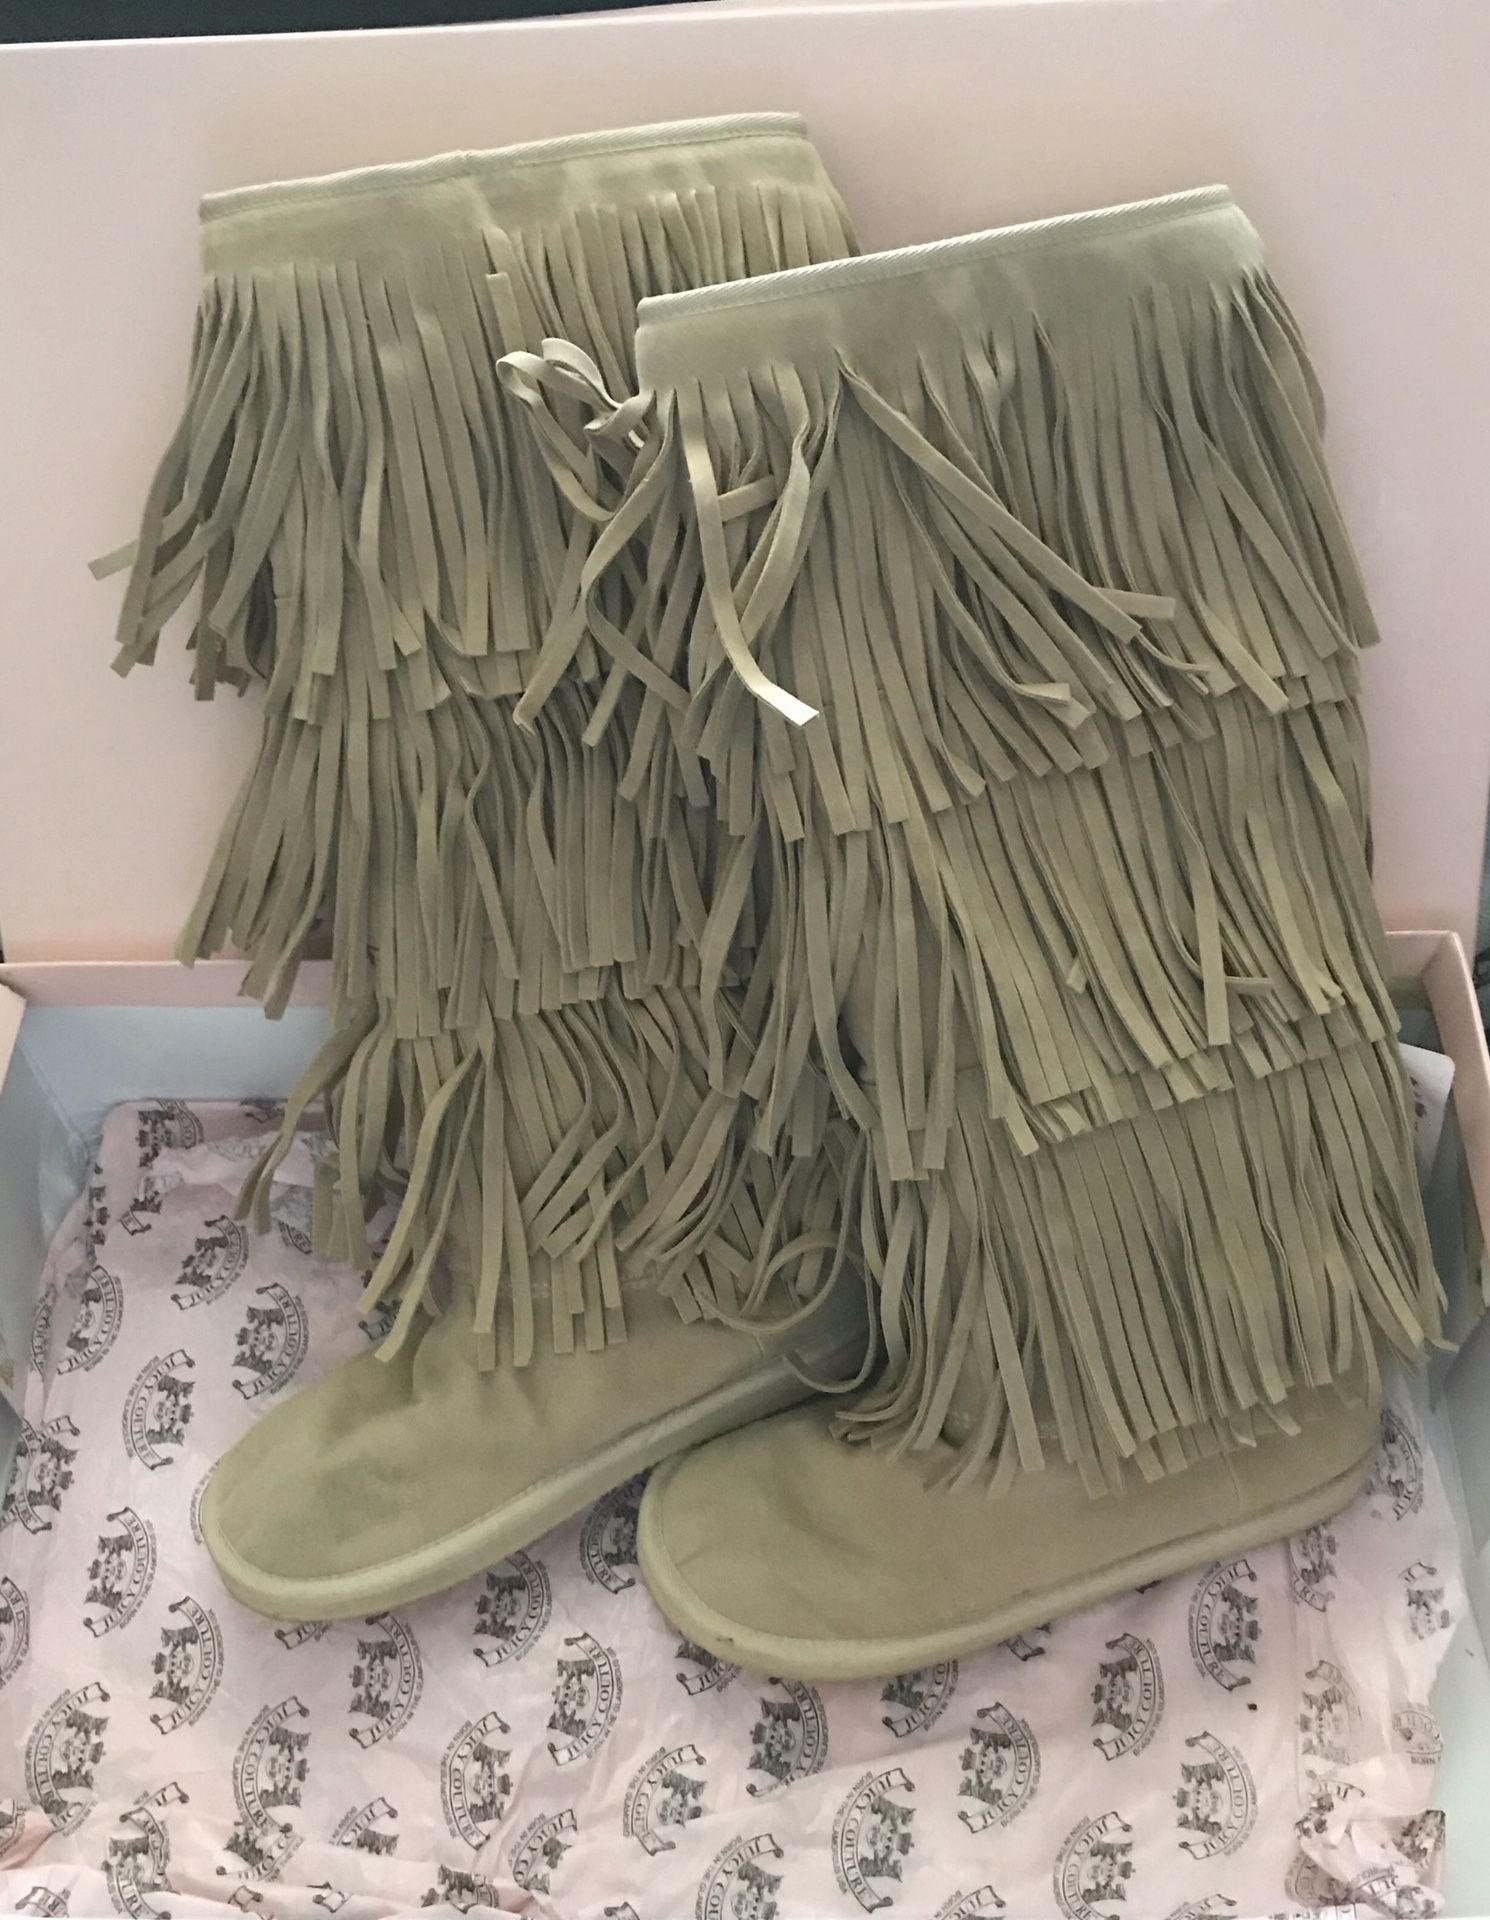 Juicy Couture NEW size 8 camel faux suede fringe boots